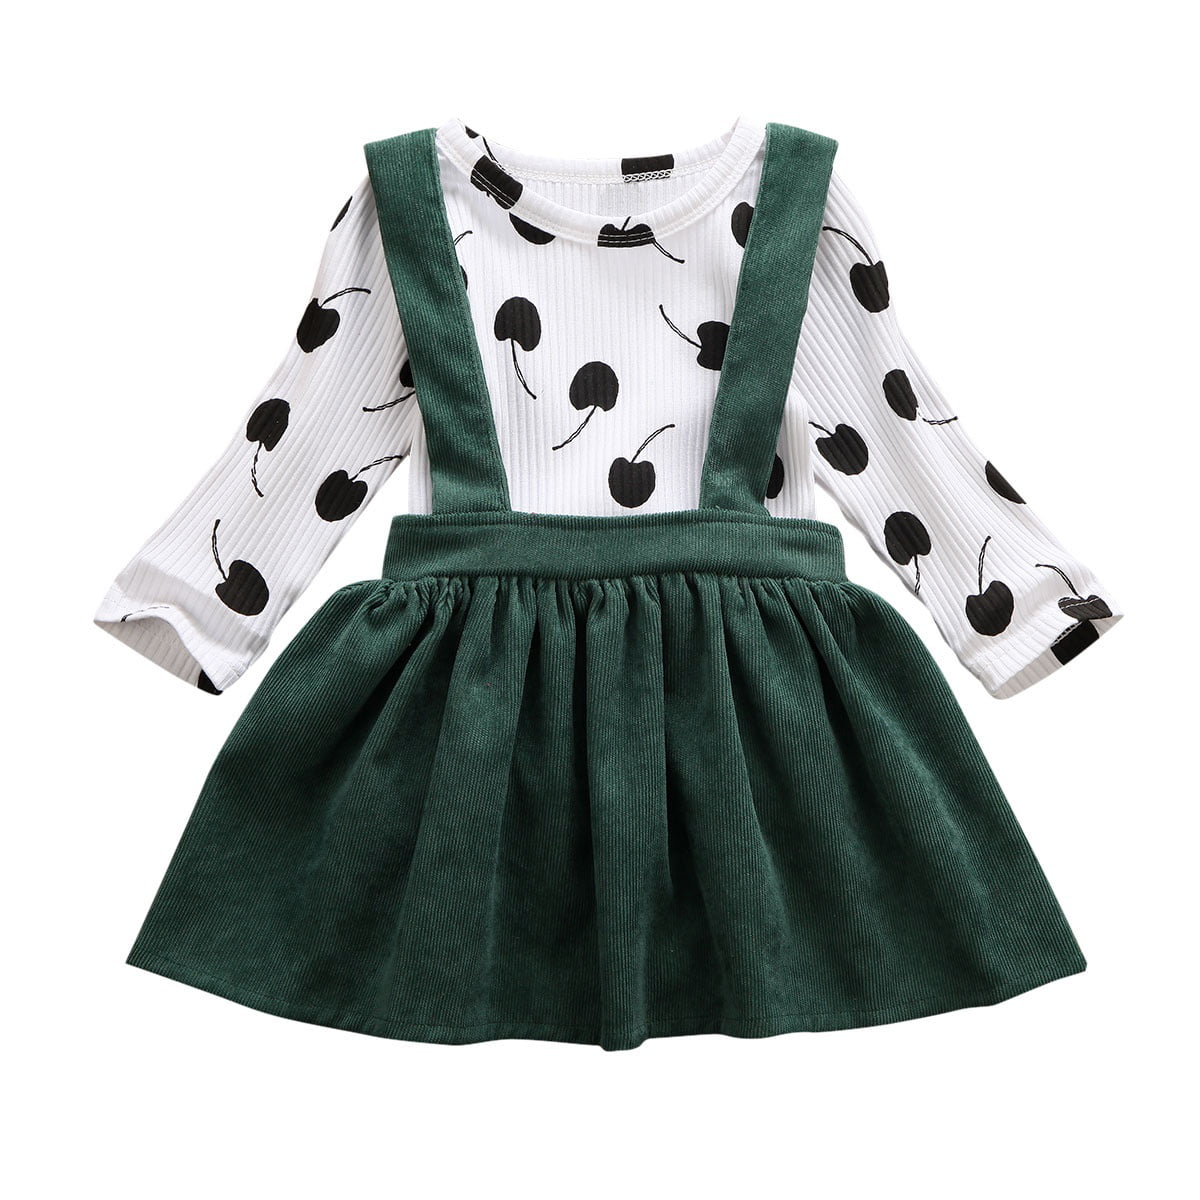 Kid Girls Party Birthday Black T-Shirt+Polka Dots Suspender Skirt Costume Outfit